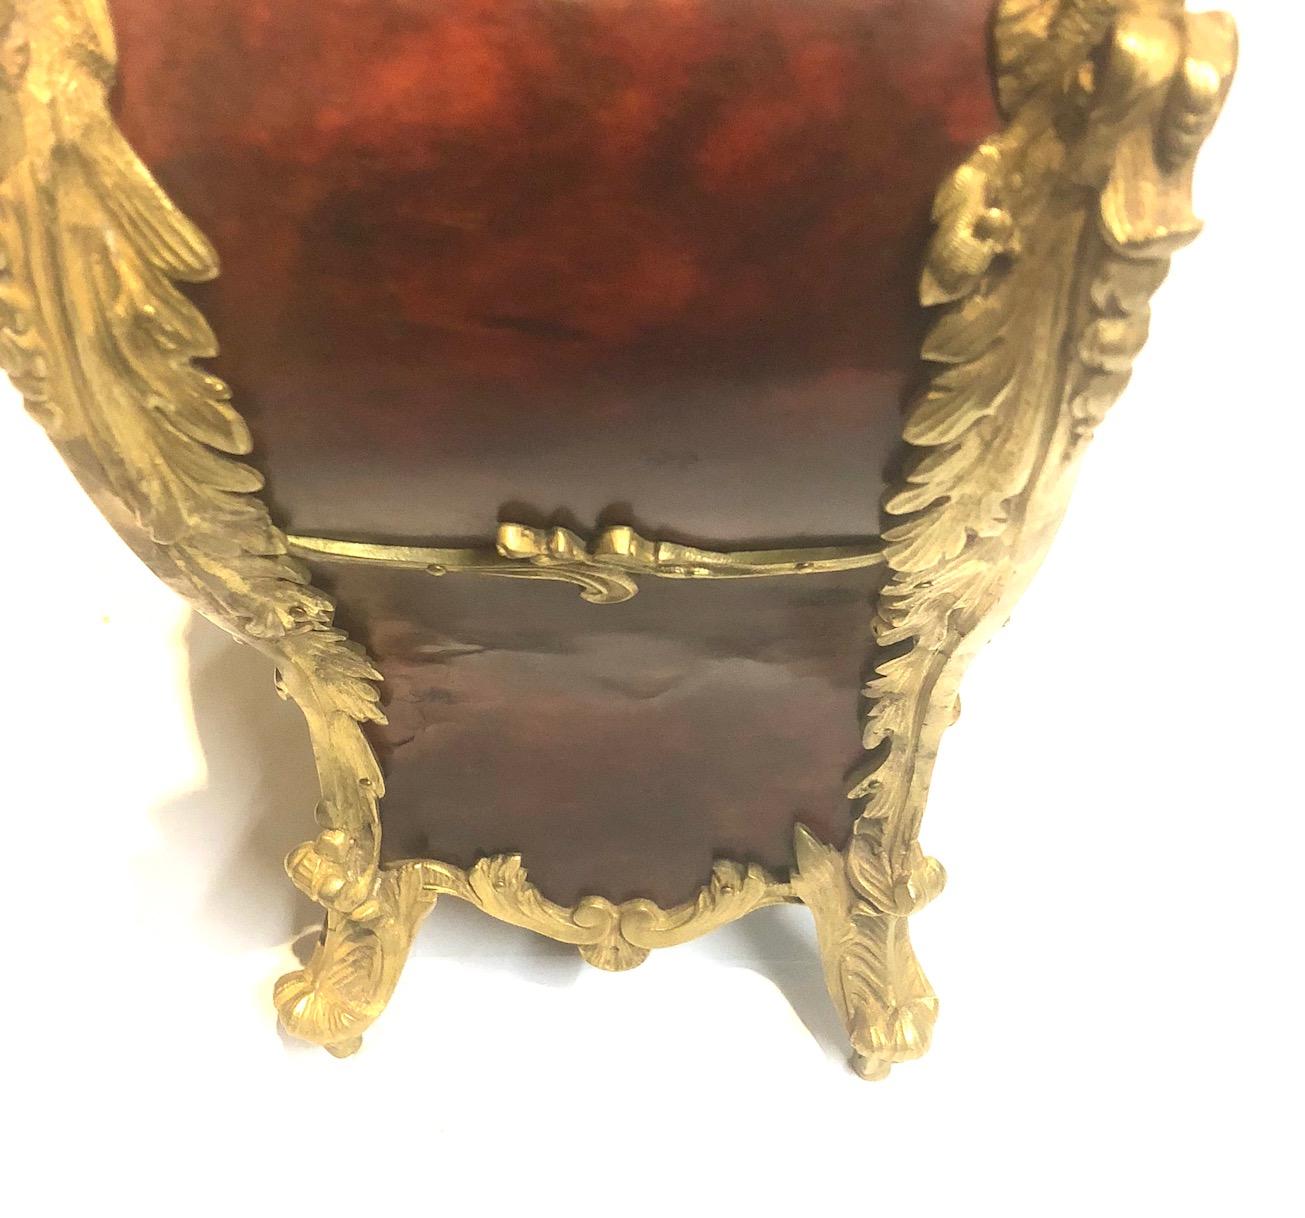 Rococo A French 19th Century Louis XV Style Ormolu Mounted Bracket Clock For Sale